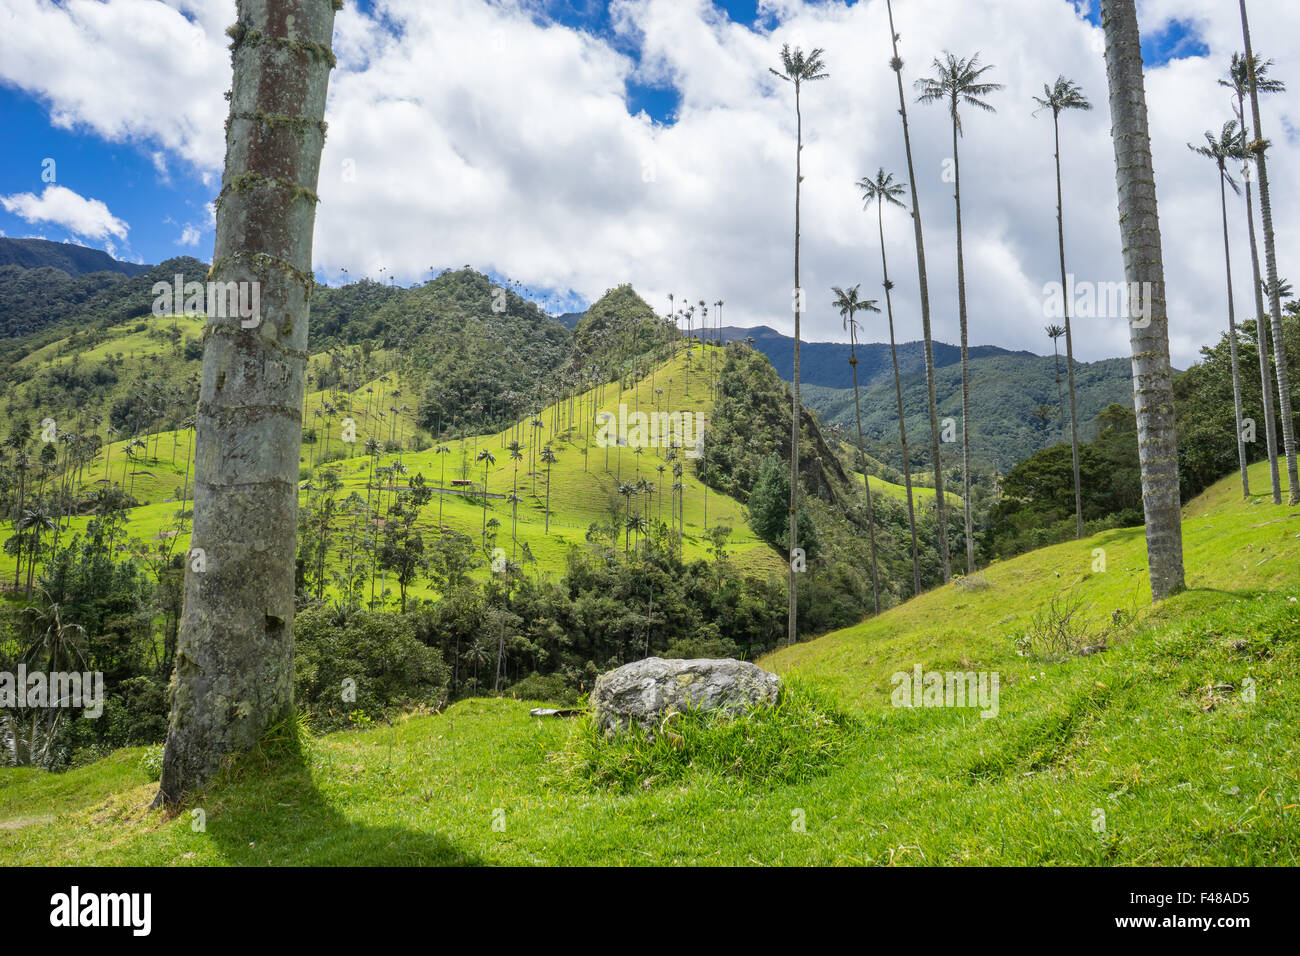 Closeup of a wax palm in the Valle de Cocora. June, 2015. Quindio, Colombia. Stock Photo